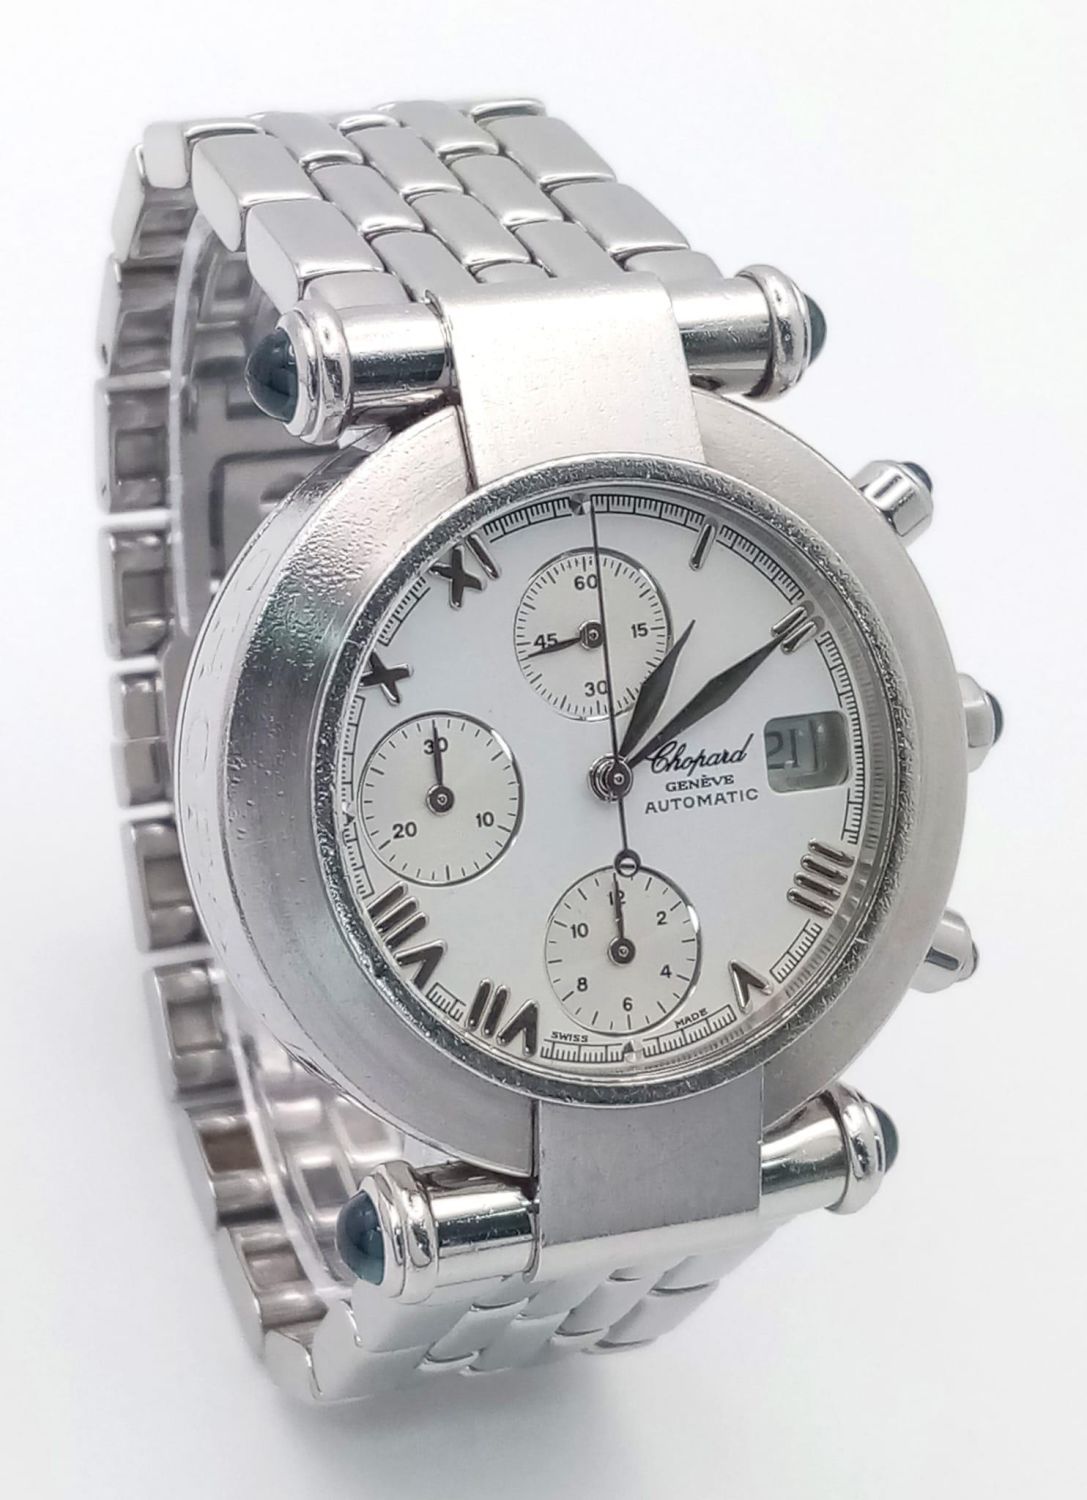 A Chopard Automatic Chronograph Gents Watch. Stainless steel bracelet and case - 37mm. White dial - Image 7 of 16